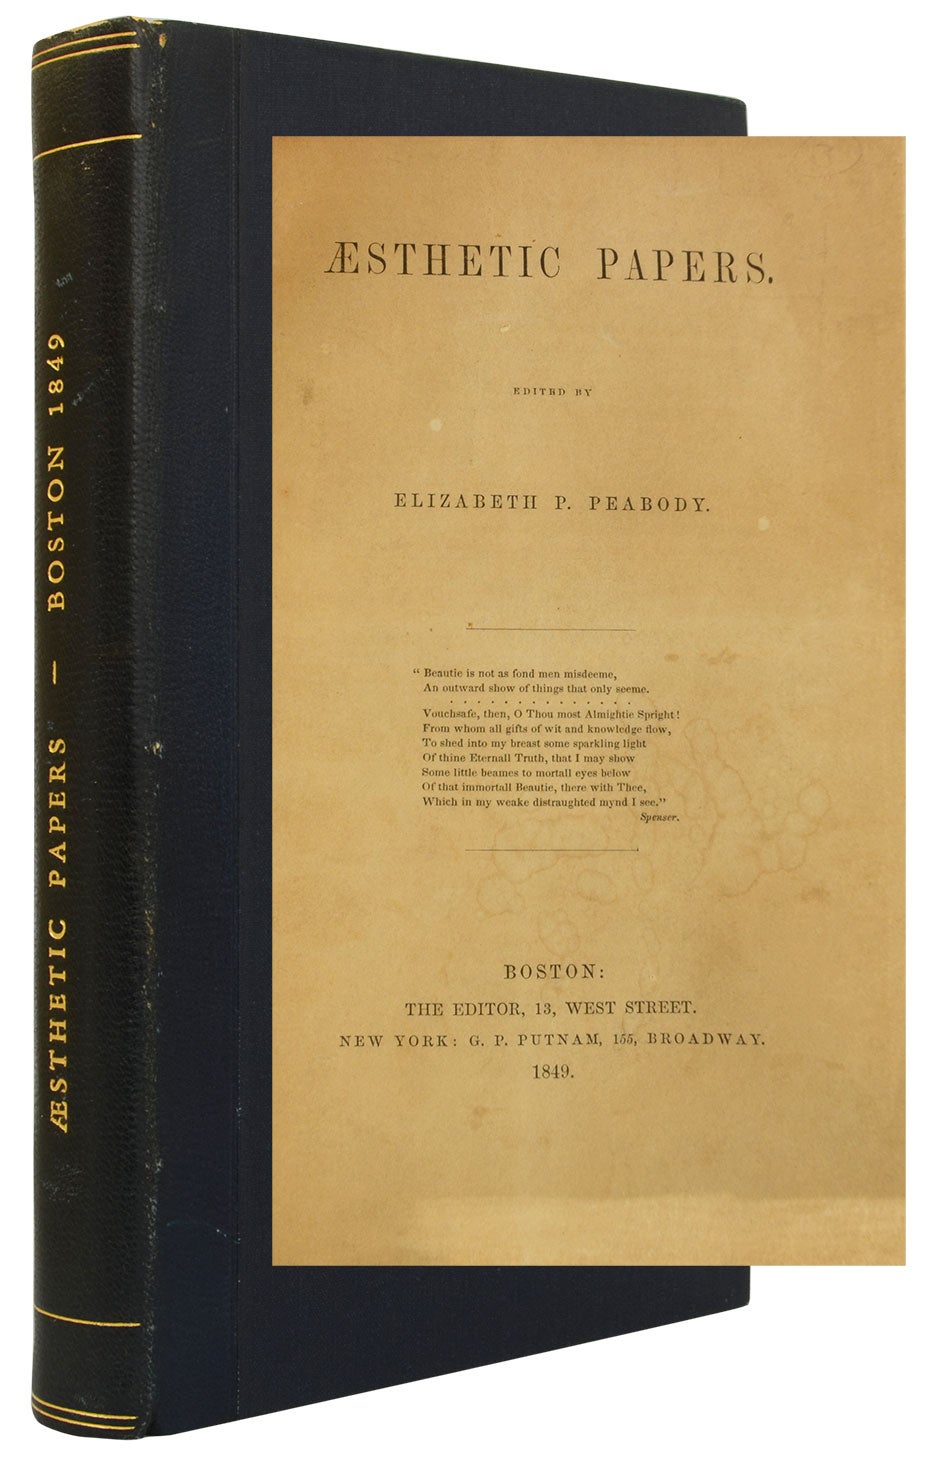 (Item #1043) Aesthetic Papers. Elizabeth Peabody, Nathaniel Hawthorne with contributions by: Henry D. Thoreau, Ralph W. Emerson.